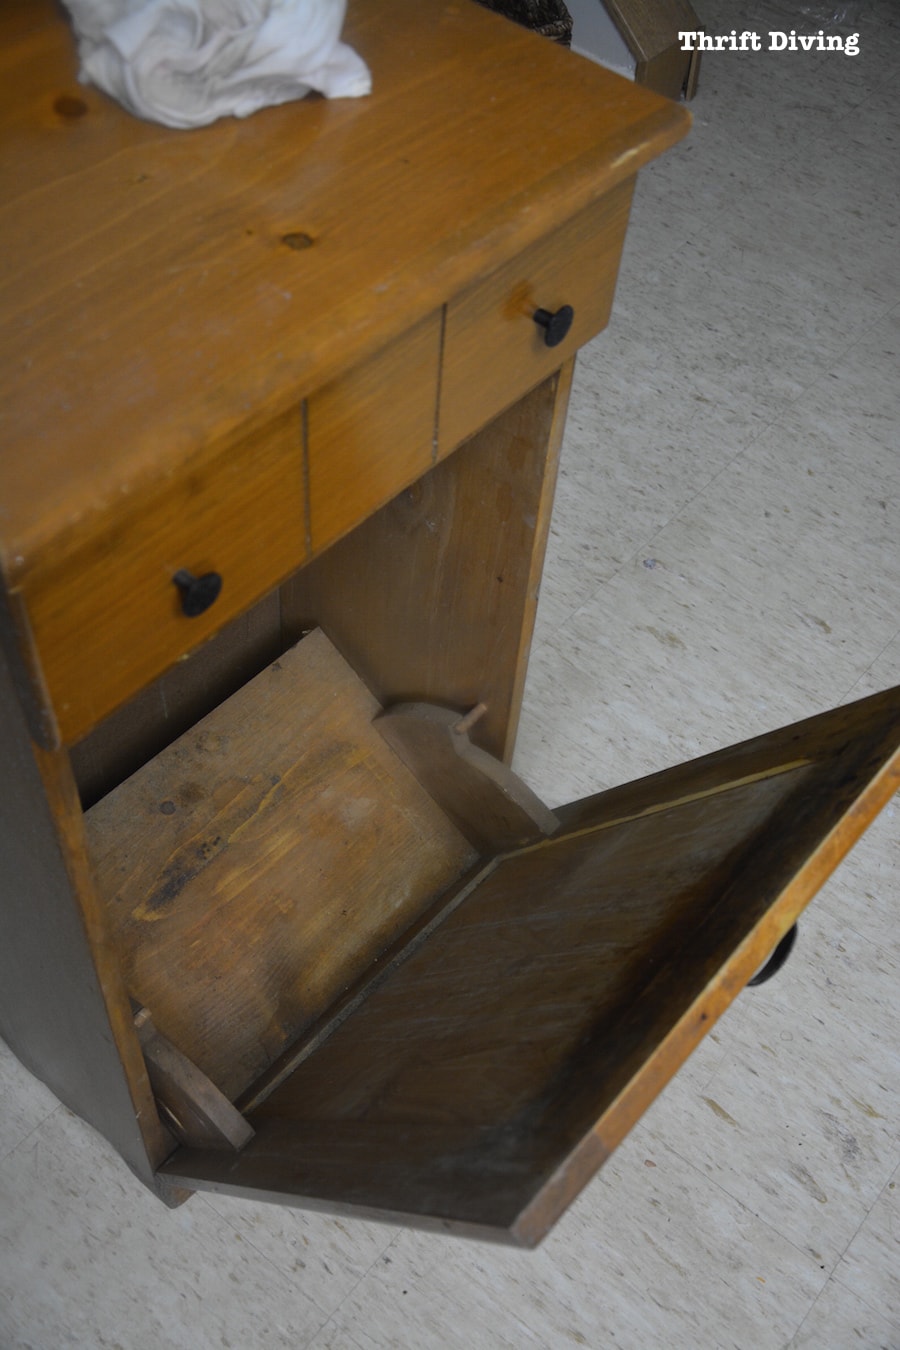 Wooden Trash Can Makeover - Dirty inside of the wooden trash can. - Thrift Diving